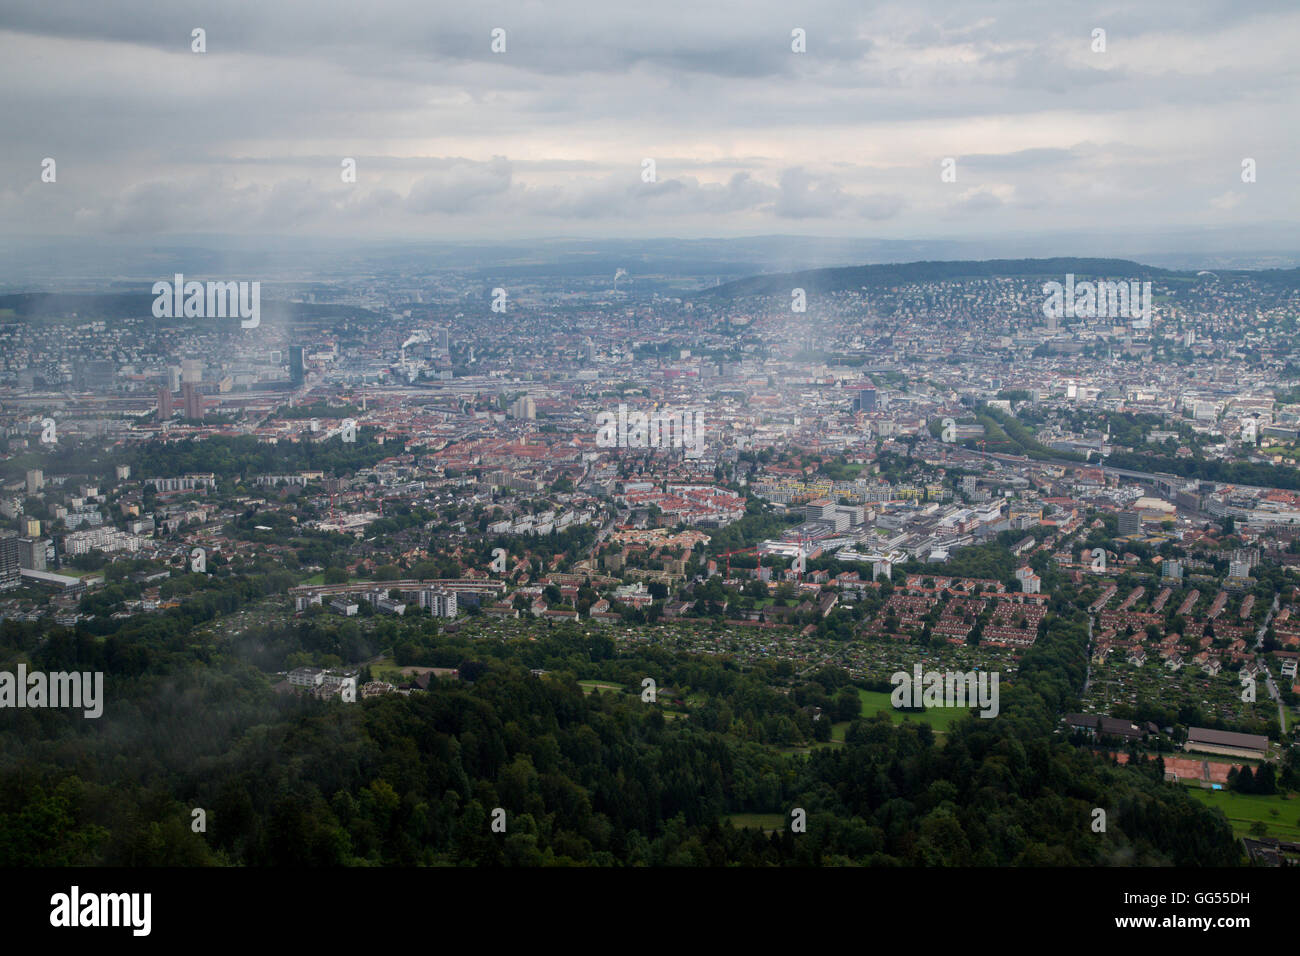 The view over Zurich city centre from the top of Üetliberg in Switzerland. Stock Photo